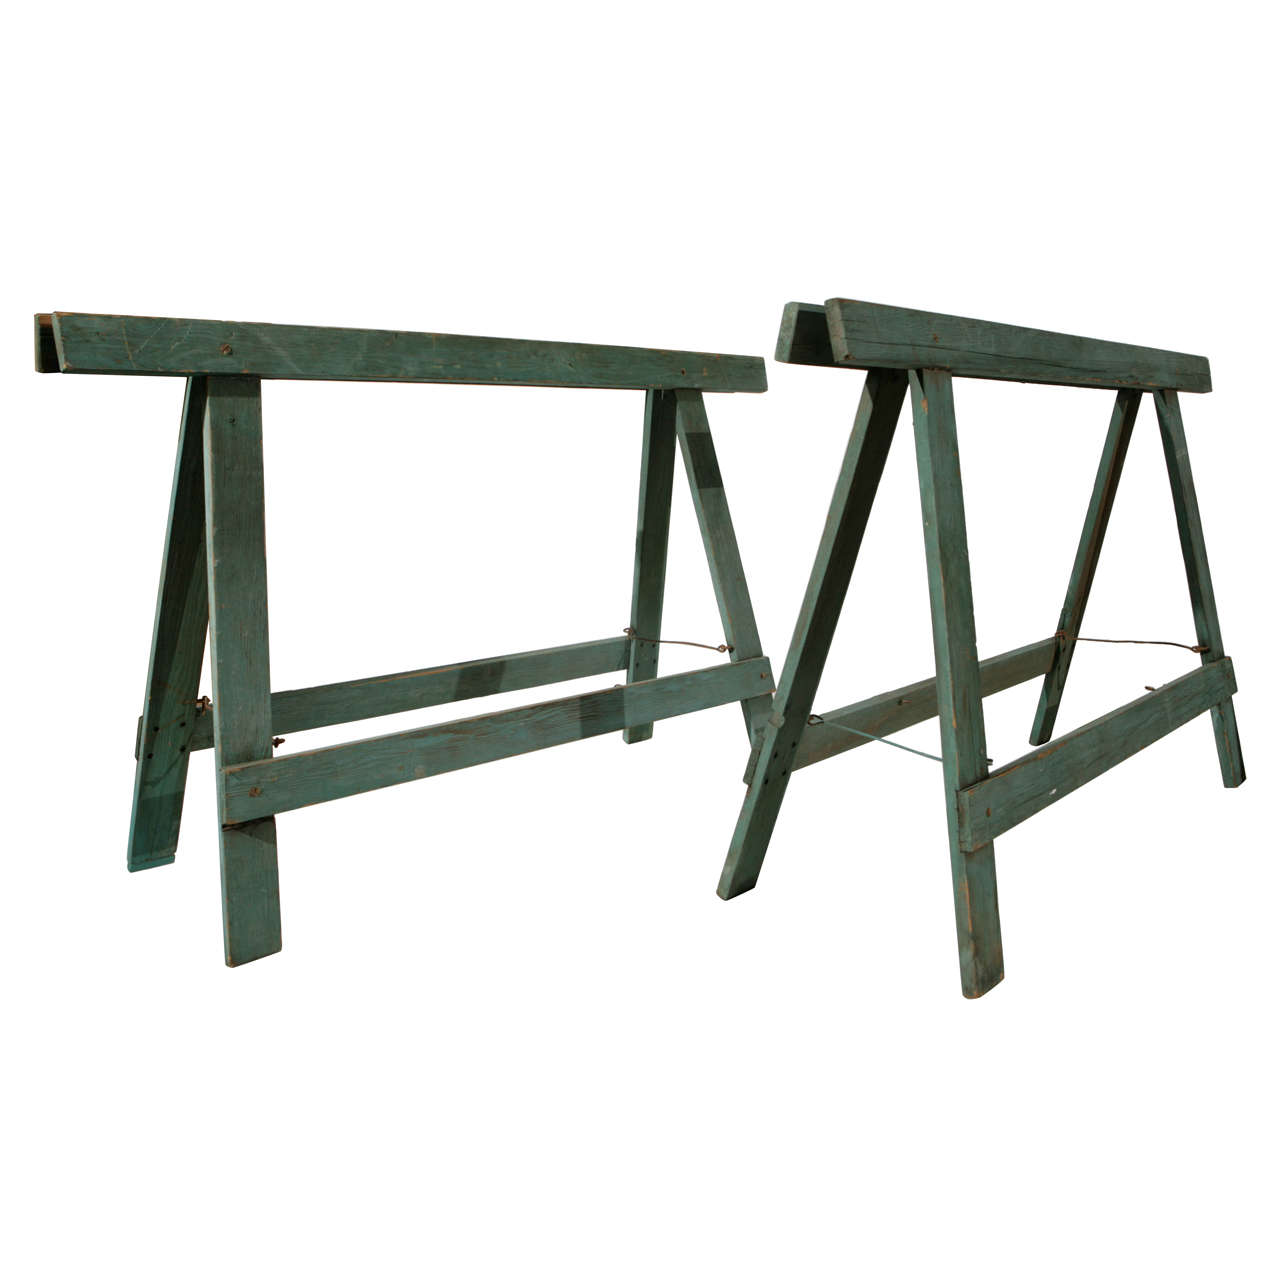 1940s Industrial Sawhorse Work Table Legs at 1stDibs | sawhorse table legs, saw  horse legs, antique sawhorse